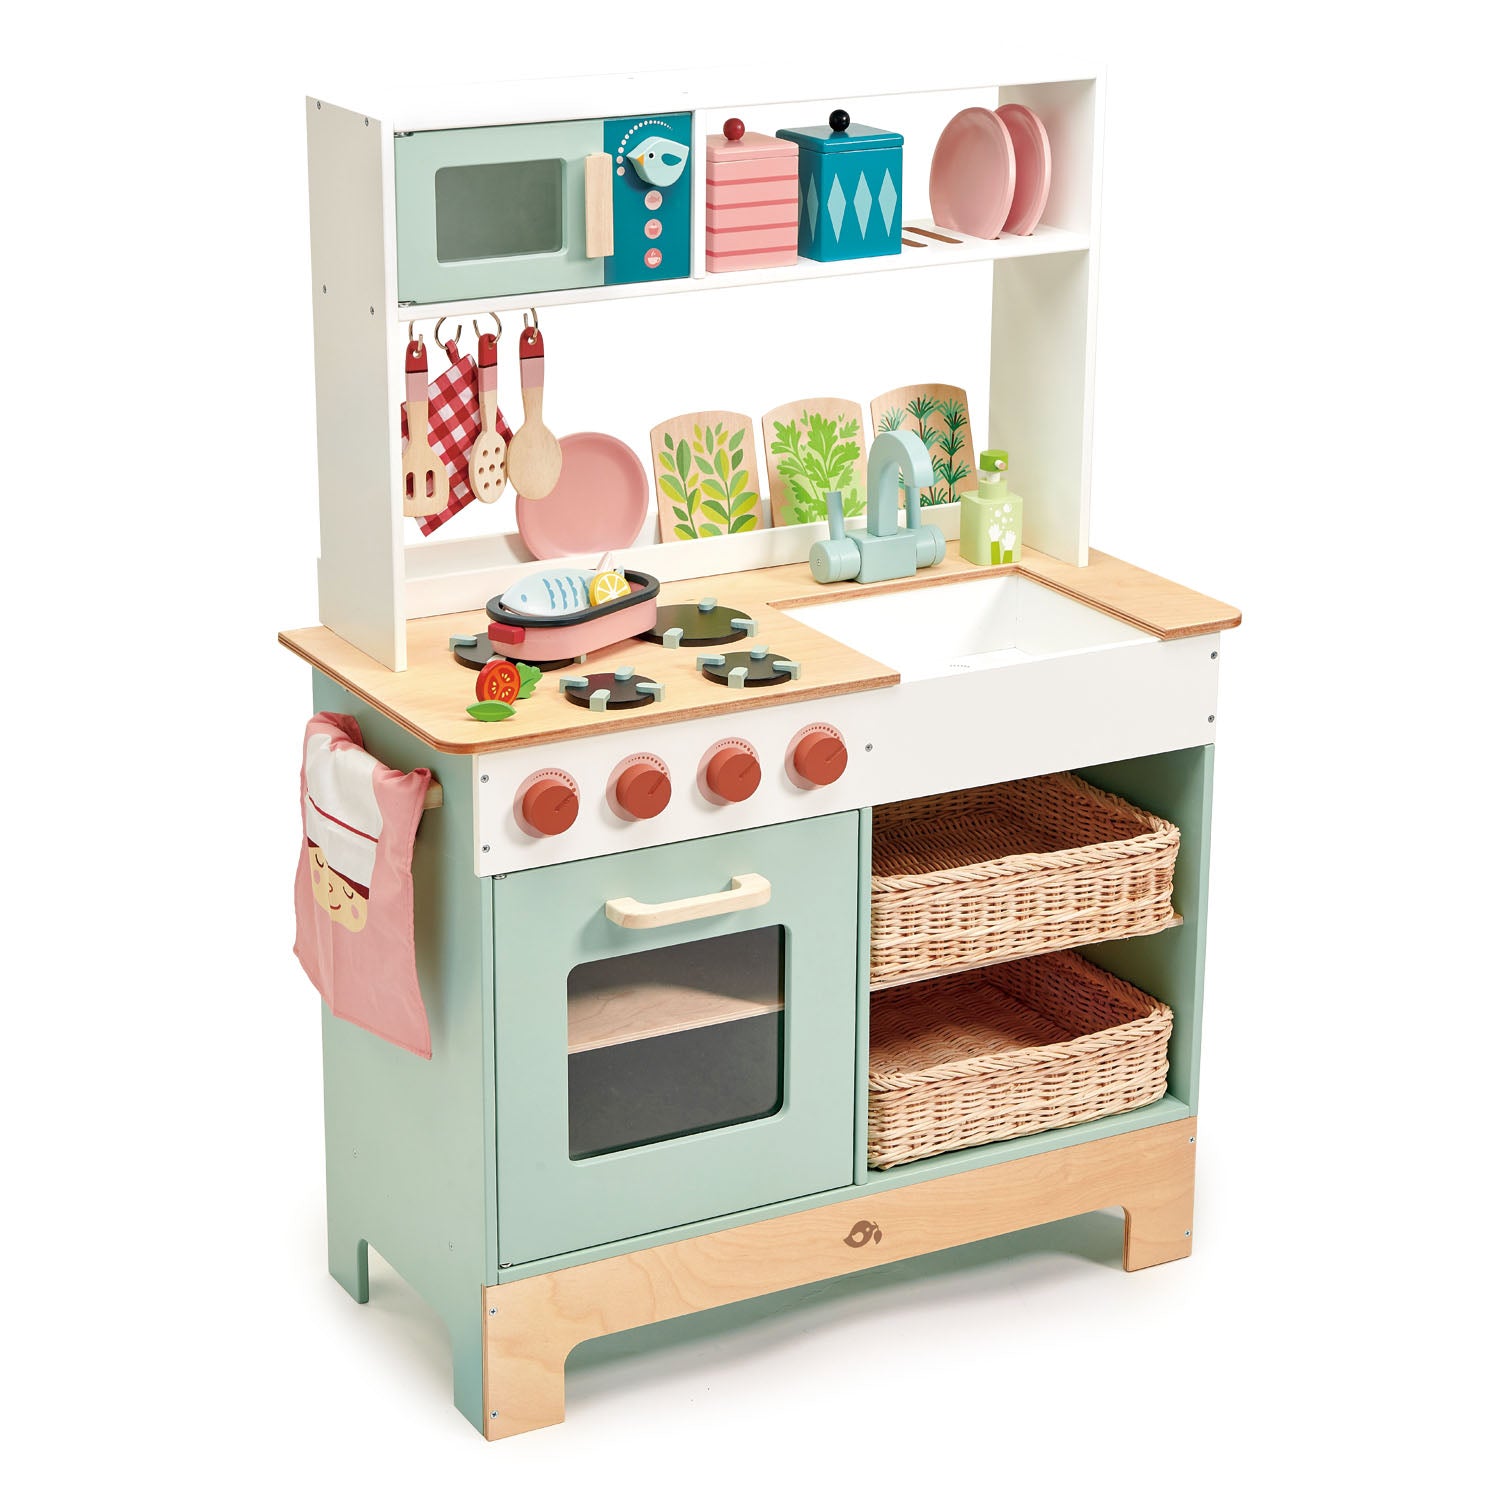 <p>With an oven and integral microwave and plate rack, this kitchen range is made extra special with a multitude of original accessories. 2 wicker baskets provide lots of storage space for other pretend play food within the mini chef range, 2 wooden storage jars, 3 racks of herbs, 3 pretty plates, a printed gingham potholder, a printed mini chef tea towel, and 3 cooking utensils.</p>
<p>Pretend play food here is a delightful 2 part fish with garnishes in an oval fish pan.</p>
<p>Lastly but not least, don’t forget to wash your hands at the sink with a handy soap dispenser! </p>
<p>Age range: 3 Years And Older  </p>
<p>Weight: 25.74 lbs</p>
<p><a href="https://www.dropbox.com/s/6mfprw753a5c08w/TL8206%20Kitchen%20Range%20Printable.pdf?dl=0" title="Kitchen Range Printable"><img src="https://cdn.shopify.com/s/files/1/1083/1780/files/TL8206-Kitchen-Range-Printable-dl_480x480.jpg?v=1597916166" alt="Kitchen Range Printable"></a></p>
<p><a href="https://www.dropbox.com/s/14m23bq0feudddr/TL%20Pasta%20Printable.pdf?dl=0"><strong>Download Pasta Printable</strong></a></p>
